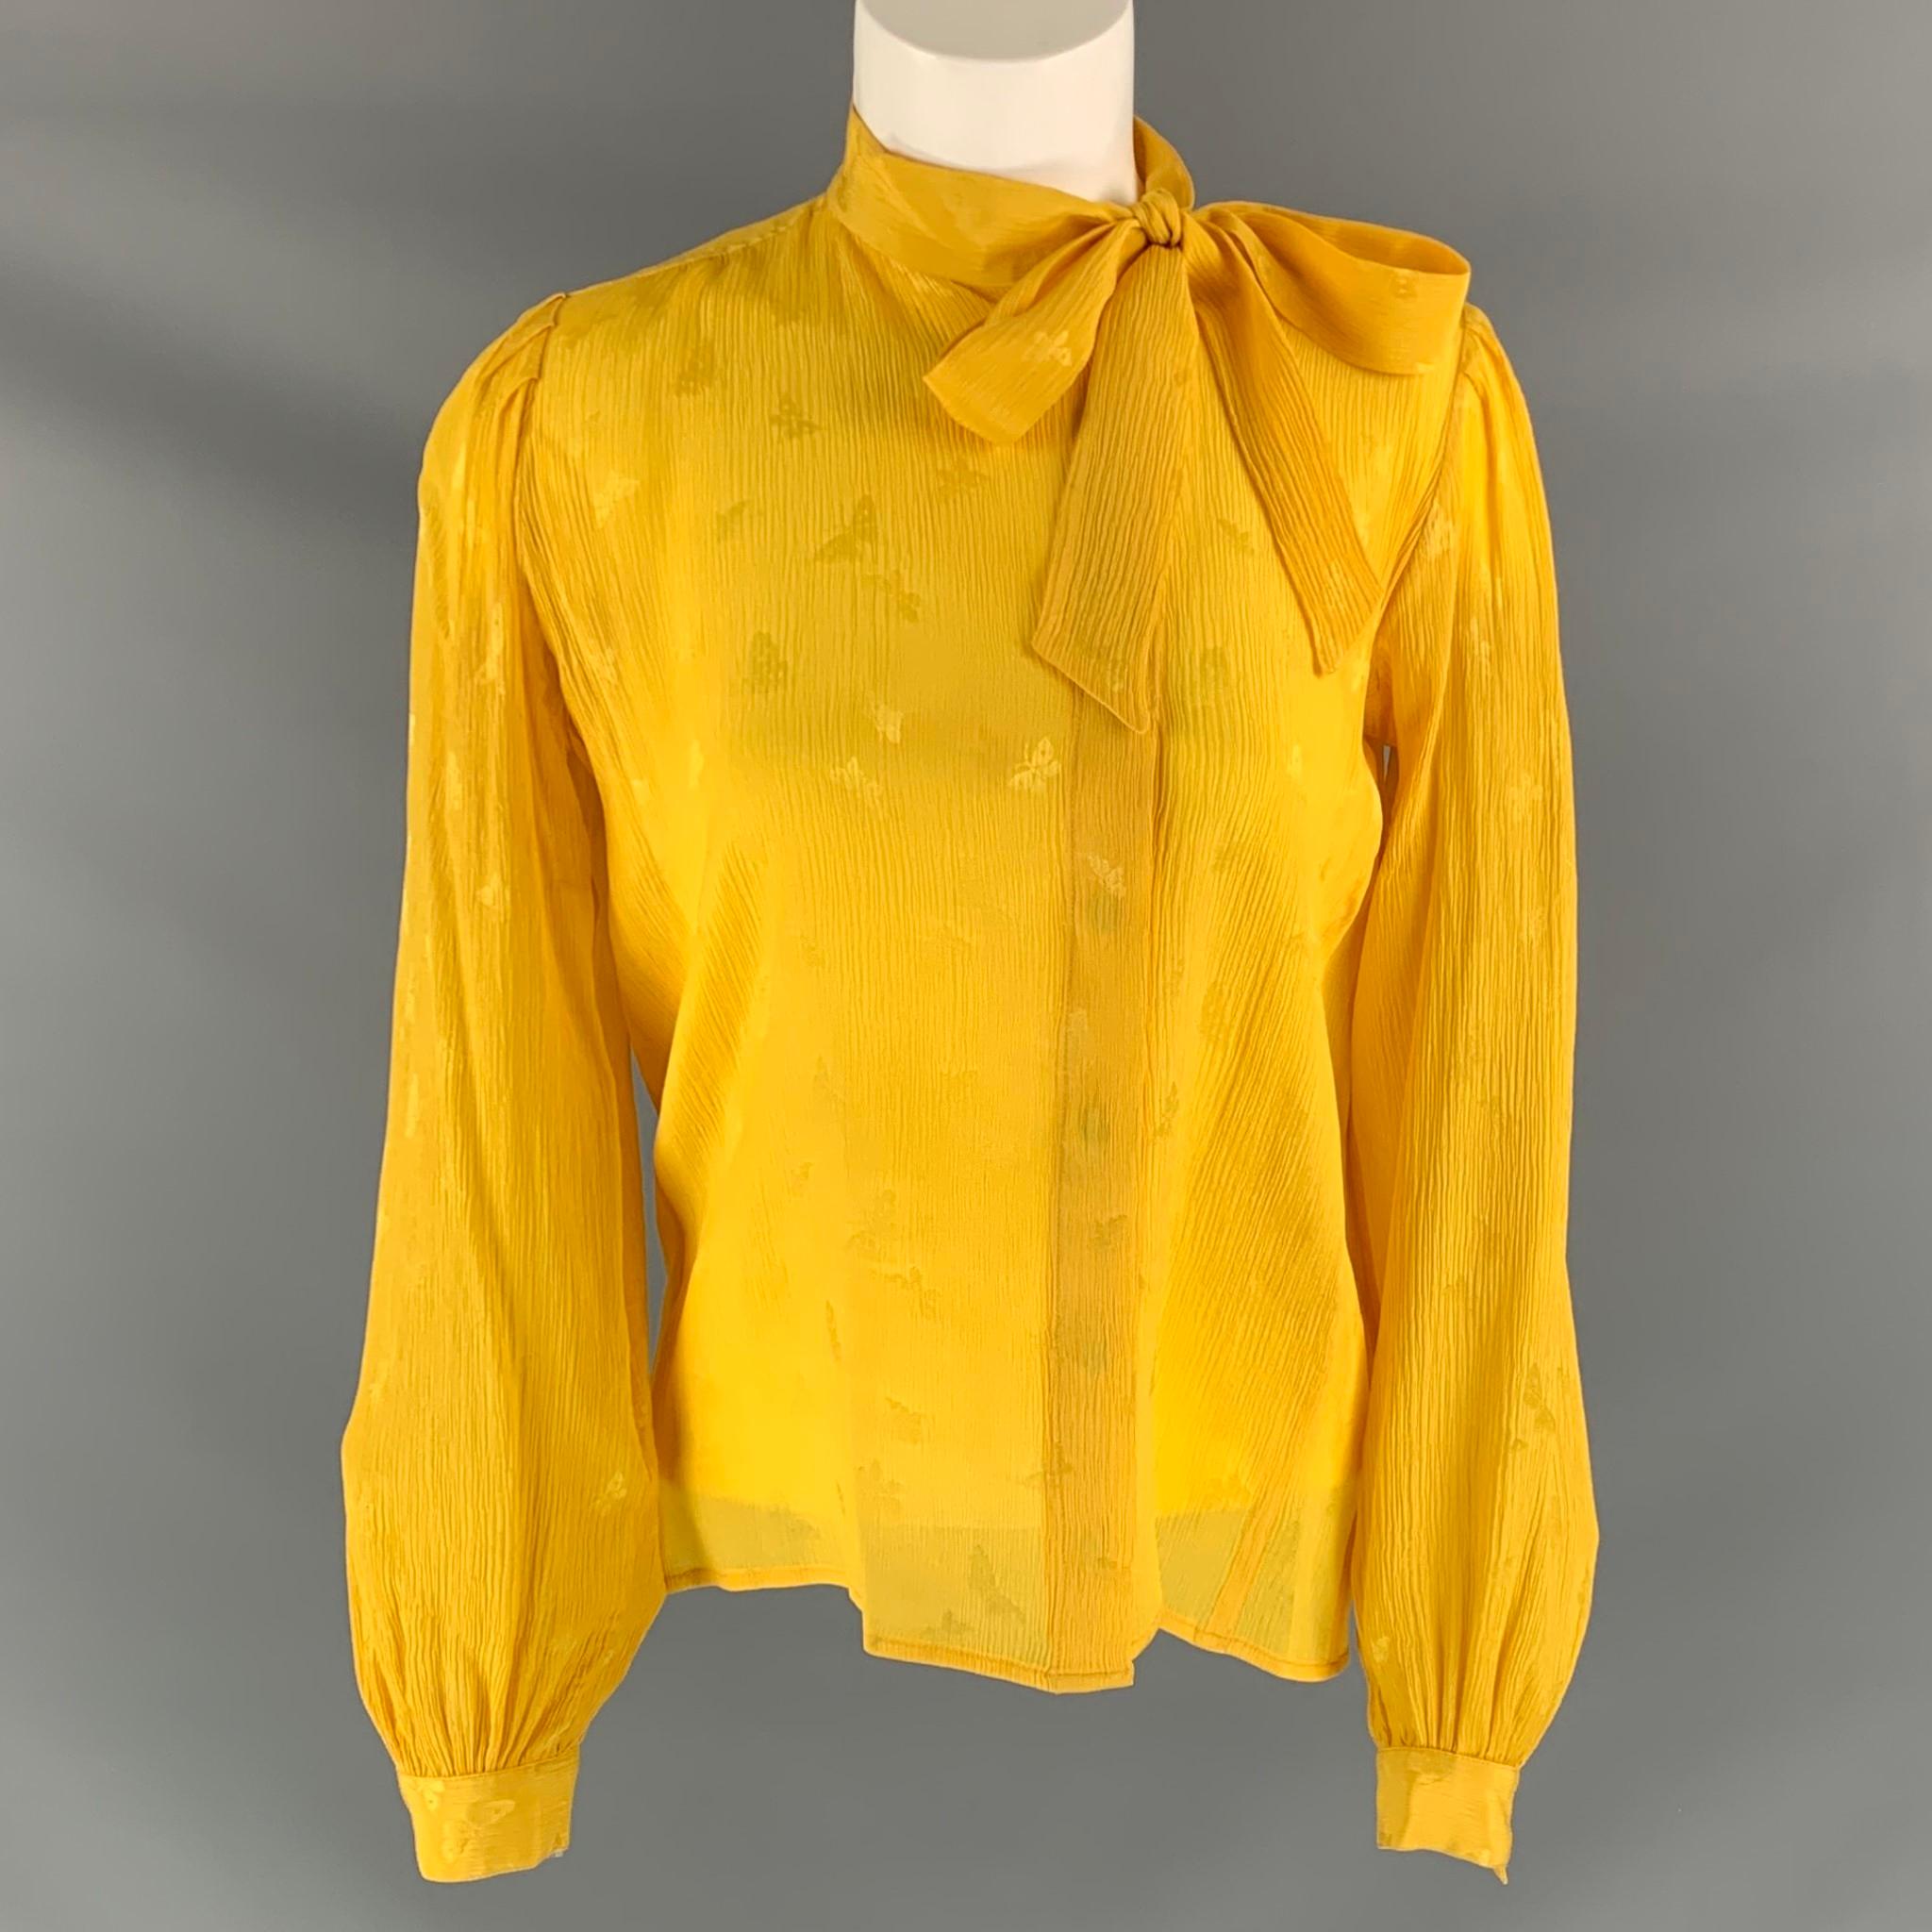 UNGARO long sleeve blouse comes in textured yellow butterfly jacquard and features a tie at neck. Made in Italy.

Very Good Pre-Owned Condition. Fabric Tag Removed.
Marked: 6

Measurements:

Shoulder: 17 in
Bust:41 in
Sleeve: 24 in
Length: 23 in